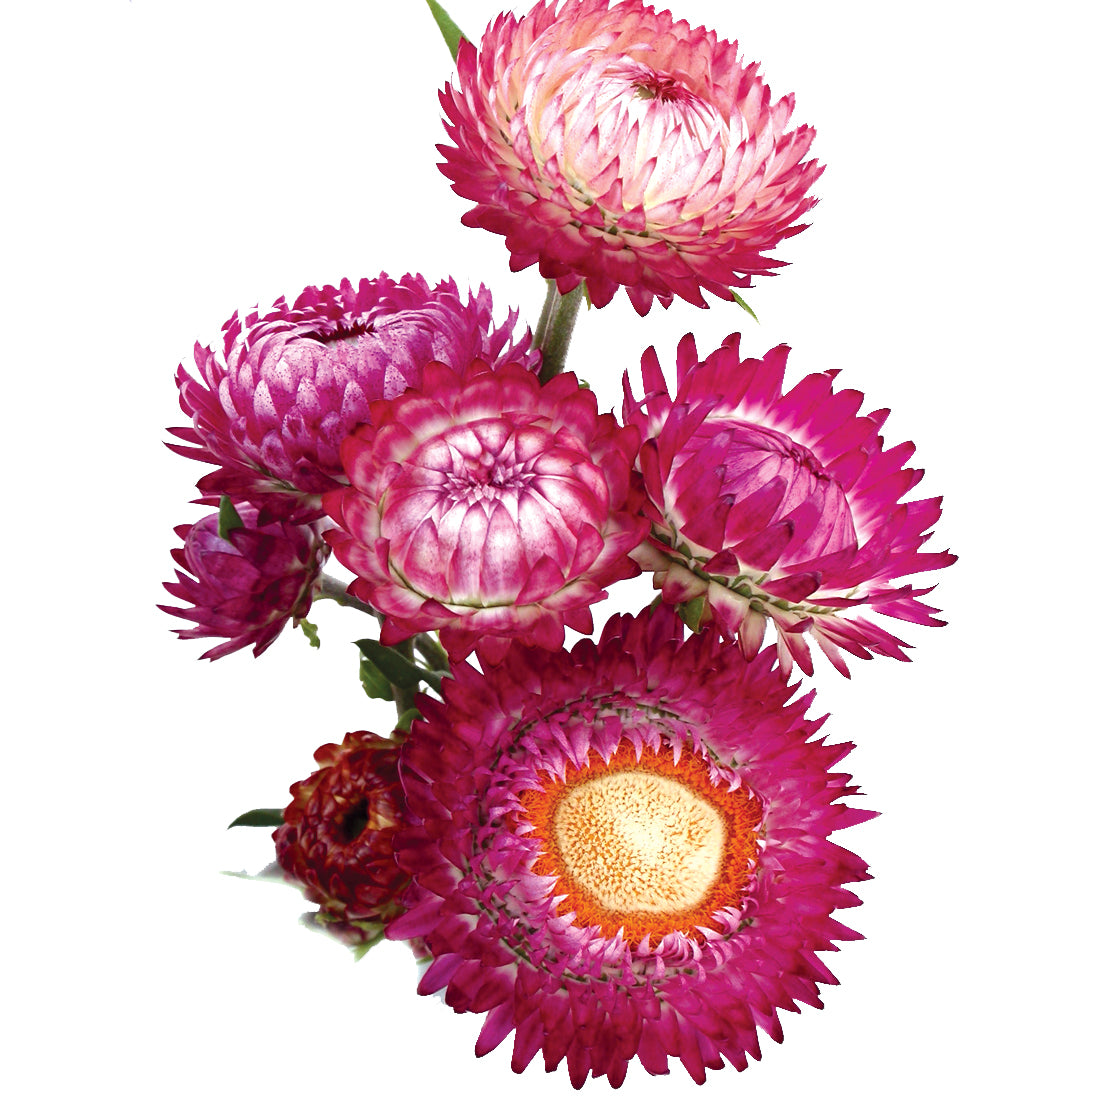 Burpee Tall Mixed Colors Strawflower Seeds 750 Seeds